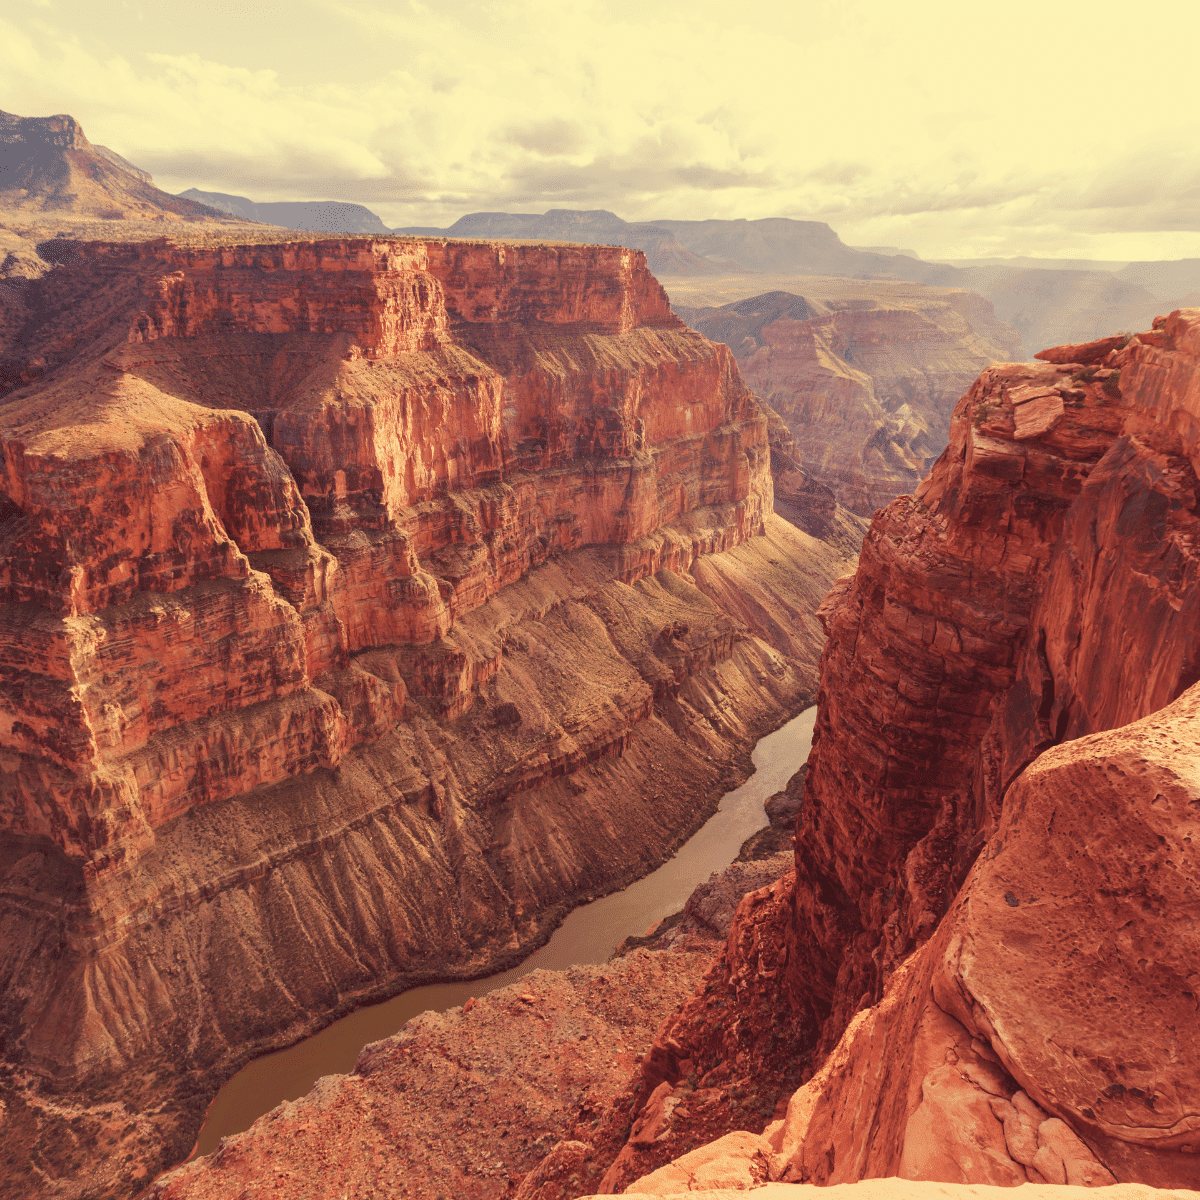 Grand Canyon with steep mountain walls and a river running through the center of the canyon.